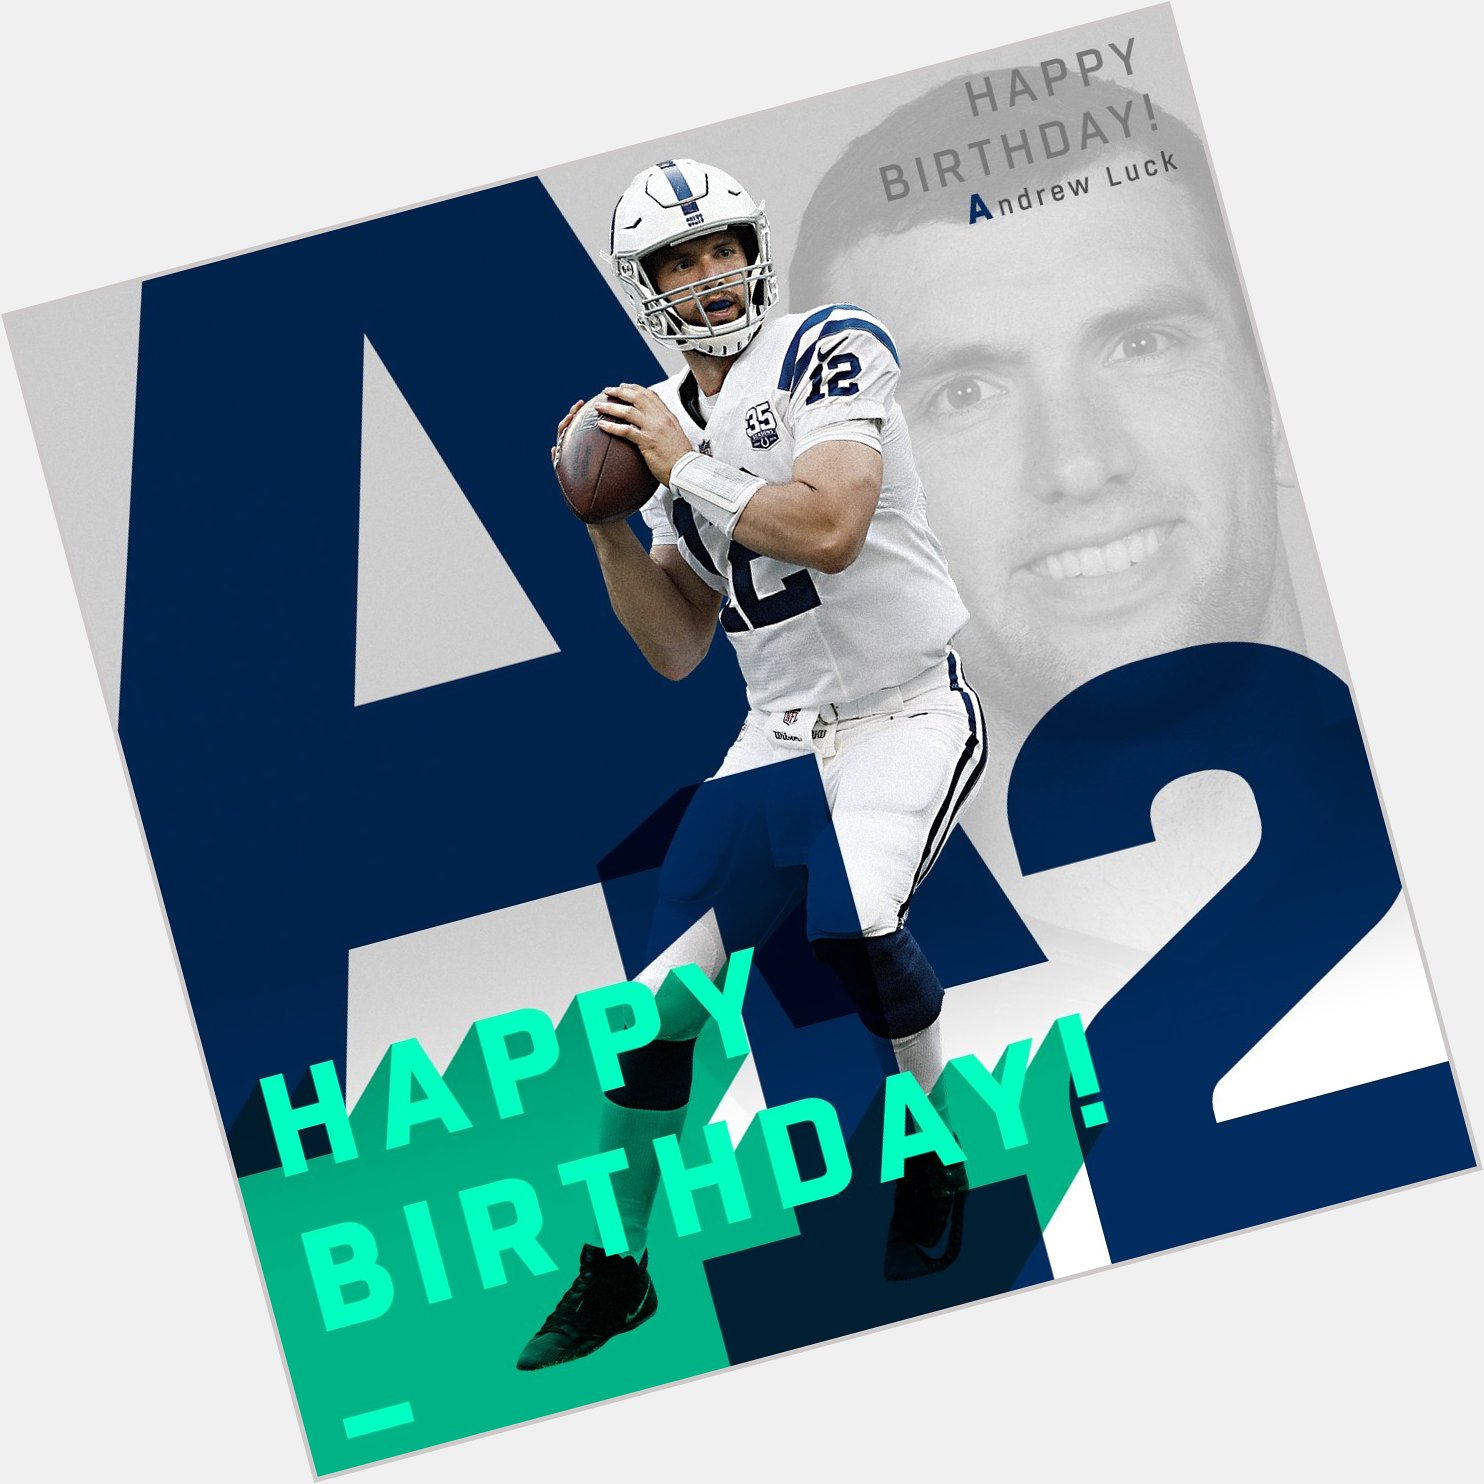 Join us in wishing Andrew Luck a HAPPY BIRTHDAY! 